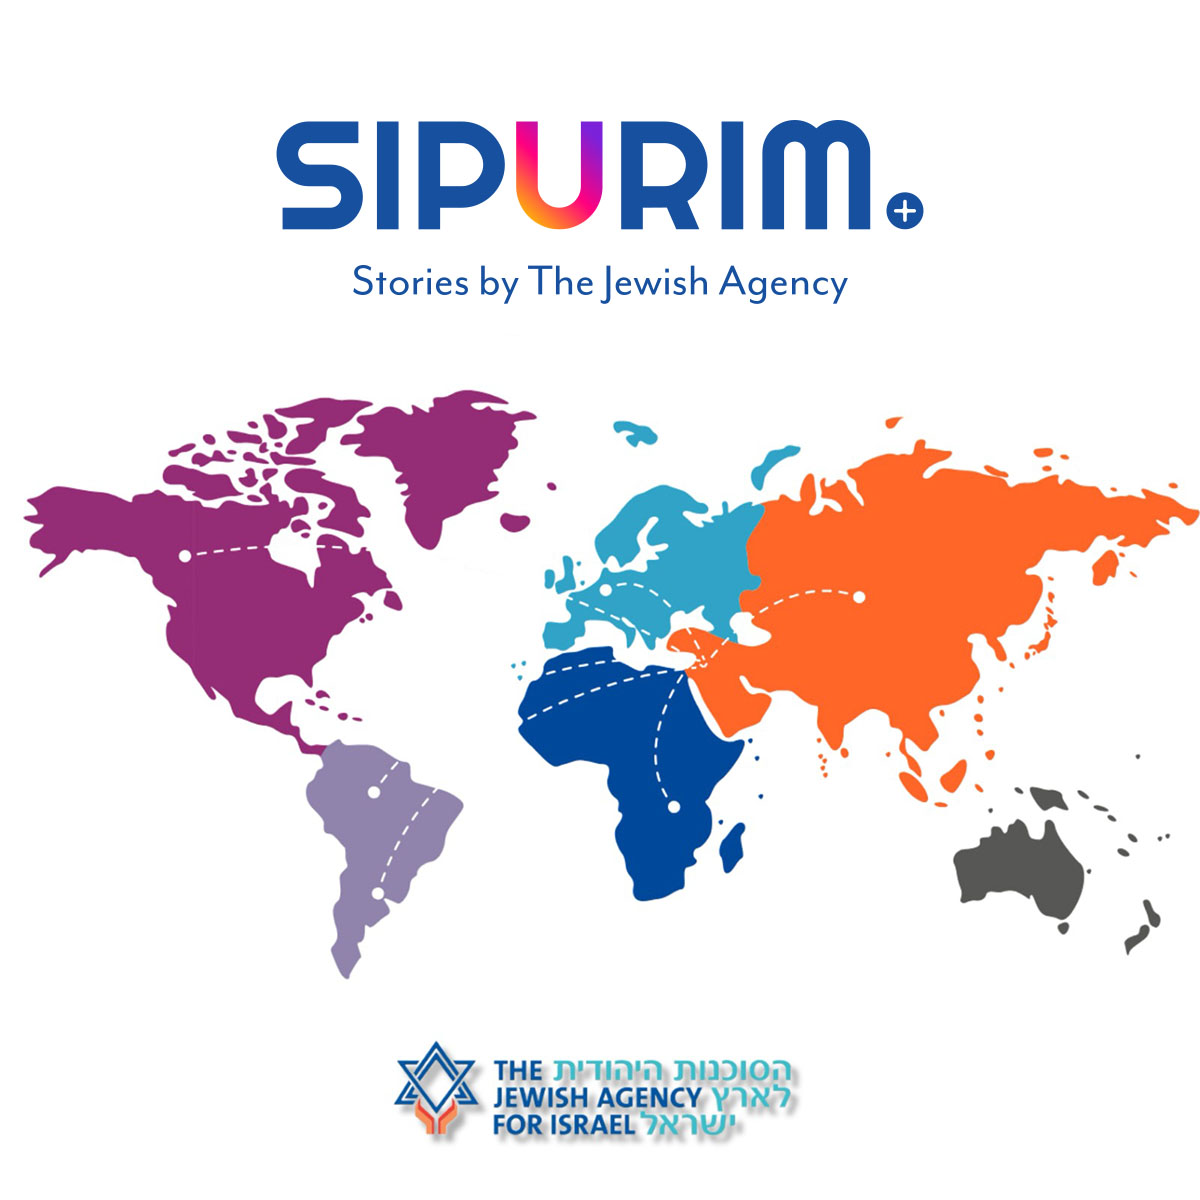 As we approach Passover, we celebrate both our oldest story and the dynamic narrative of our global Jewish community. Discover stories of resilience and unity from our Shlichim in diverse communities around the world on our newly-launched Sipurim site: sipurim.jewishagency.org